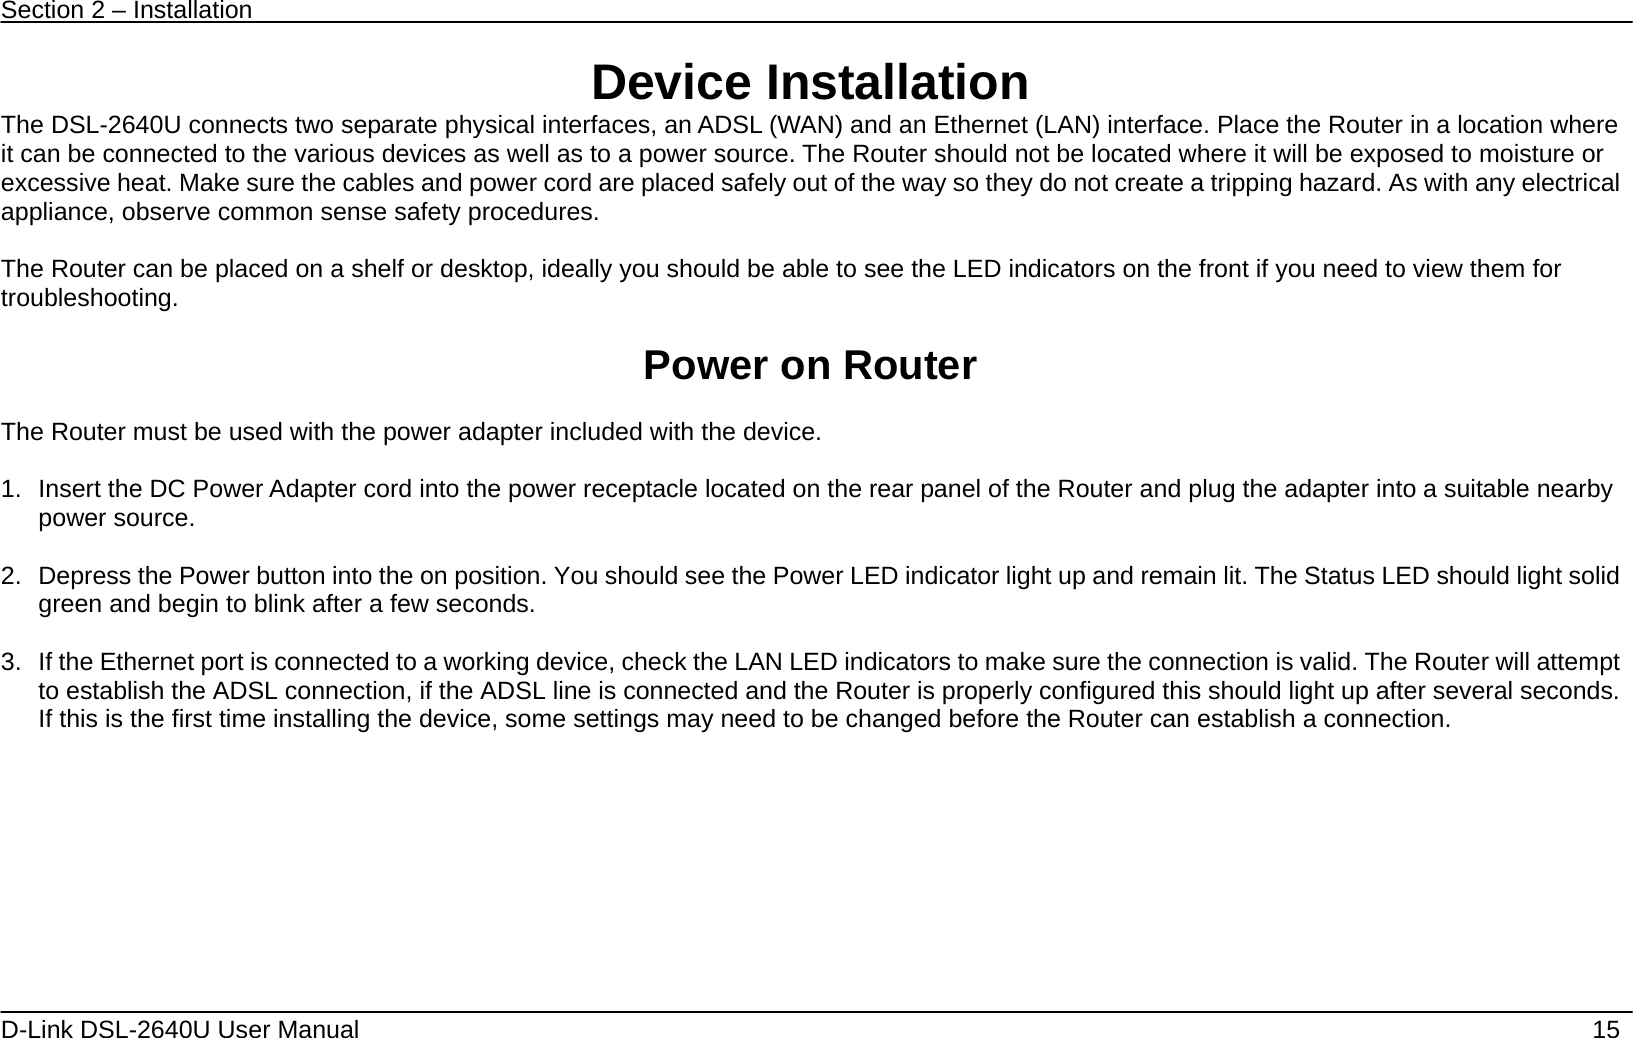 Section 2 – Installation   D-Link DSL-2640U User Manual    15 Device Installation The DSL-2640U connects two separate physical interfaces, an ADSL (WAN) and an Ethernet (LAN) interface. Place the Router in a location where it can be connected to the various devices as well as to a power source. The Router should not be located where it will be exposed to moisture or excessive heat. Make sure the cables and power cord are placed safely out of the way so they do not create a tripping hazard. As with any electrical appliance, observe common sense safety procedures.  The Router can be placed on a shelf or desktop, ideally you should be able to see the LED indicators on the front if you need to view them for troubleshooting.  Power on Router  The Router must be used with the power adapter included with the device.  1.  Insert the DC Power Adapter cord into the power receptacle located on the rear panel of the Router and plug the adapter into a suitable nearby power source.  2.  Depress the Power button into the on position. You should see the Power LED indicator light up and remain lit. The Status LED should light solid green and begin to blink after a few seconds.  3.  If the Ethernet port is connected to a working device, check the LAN LED indicators to make sure the connection is valid. The Router will attempt to establish the ADSL connection, if the ADSL line is connected and the Router is properly configured this should light up after several seconds. If this is the first time installing the device, some settings may need to be changed before the Router can establish a connection.    